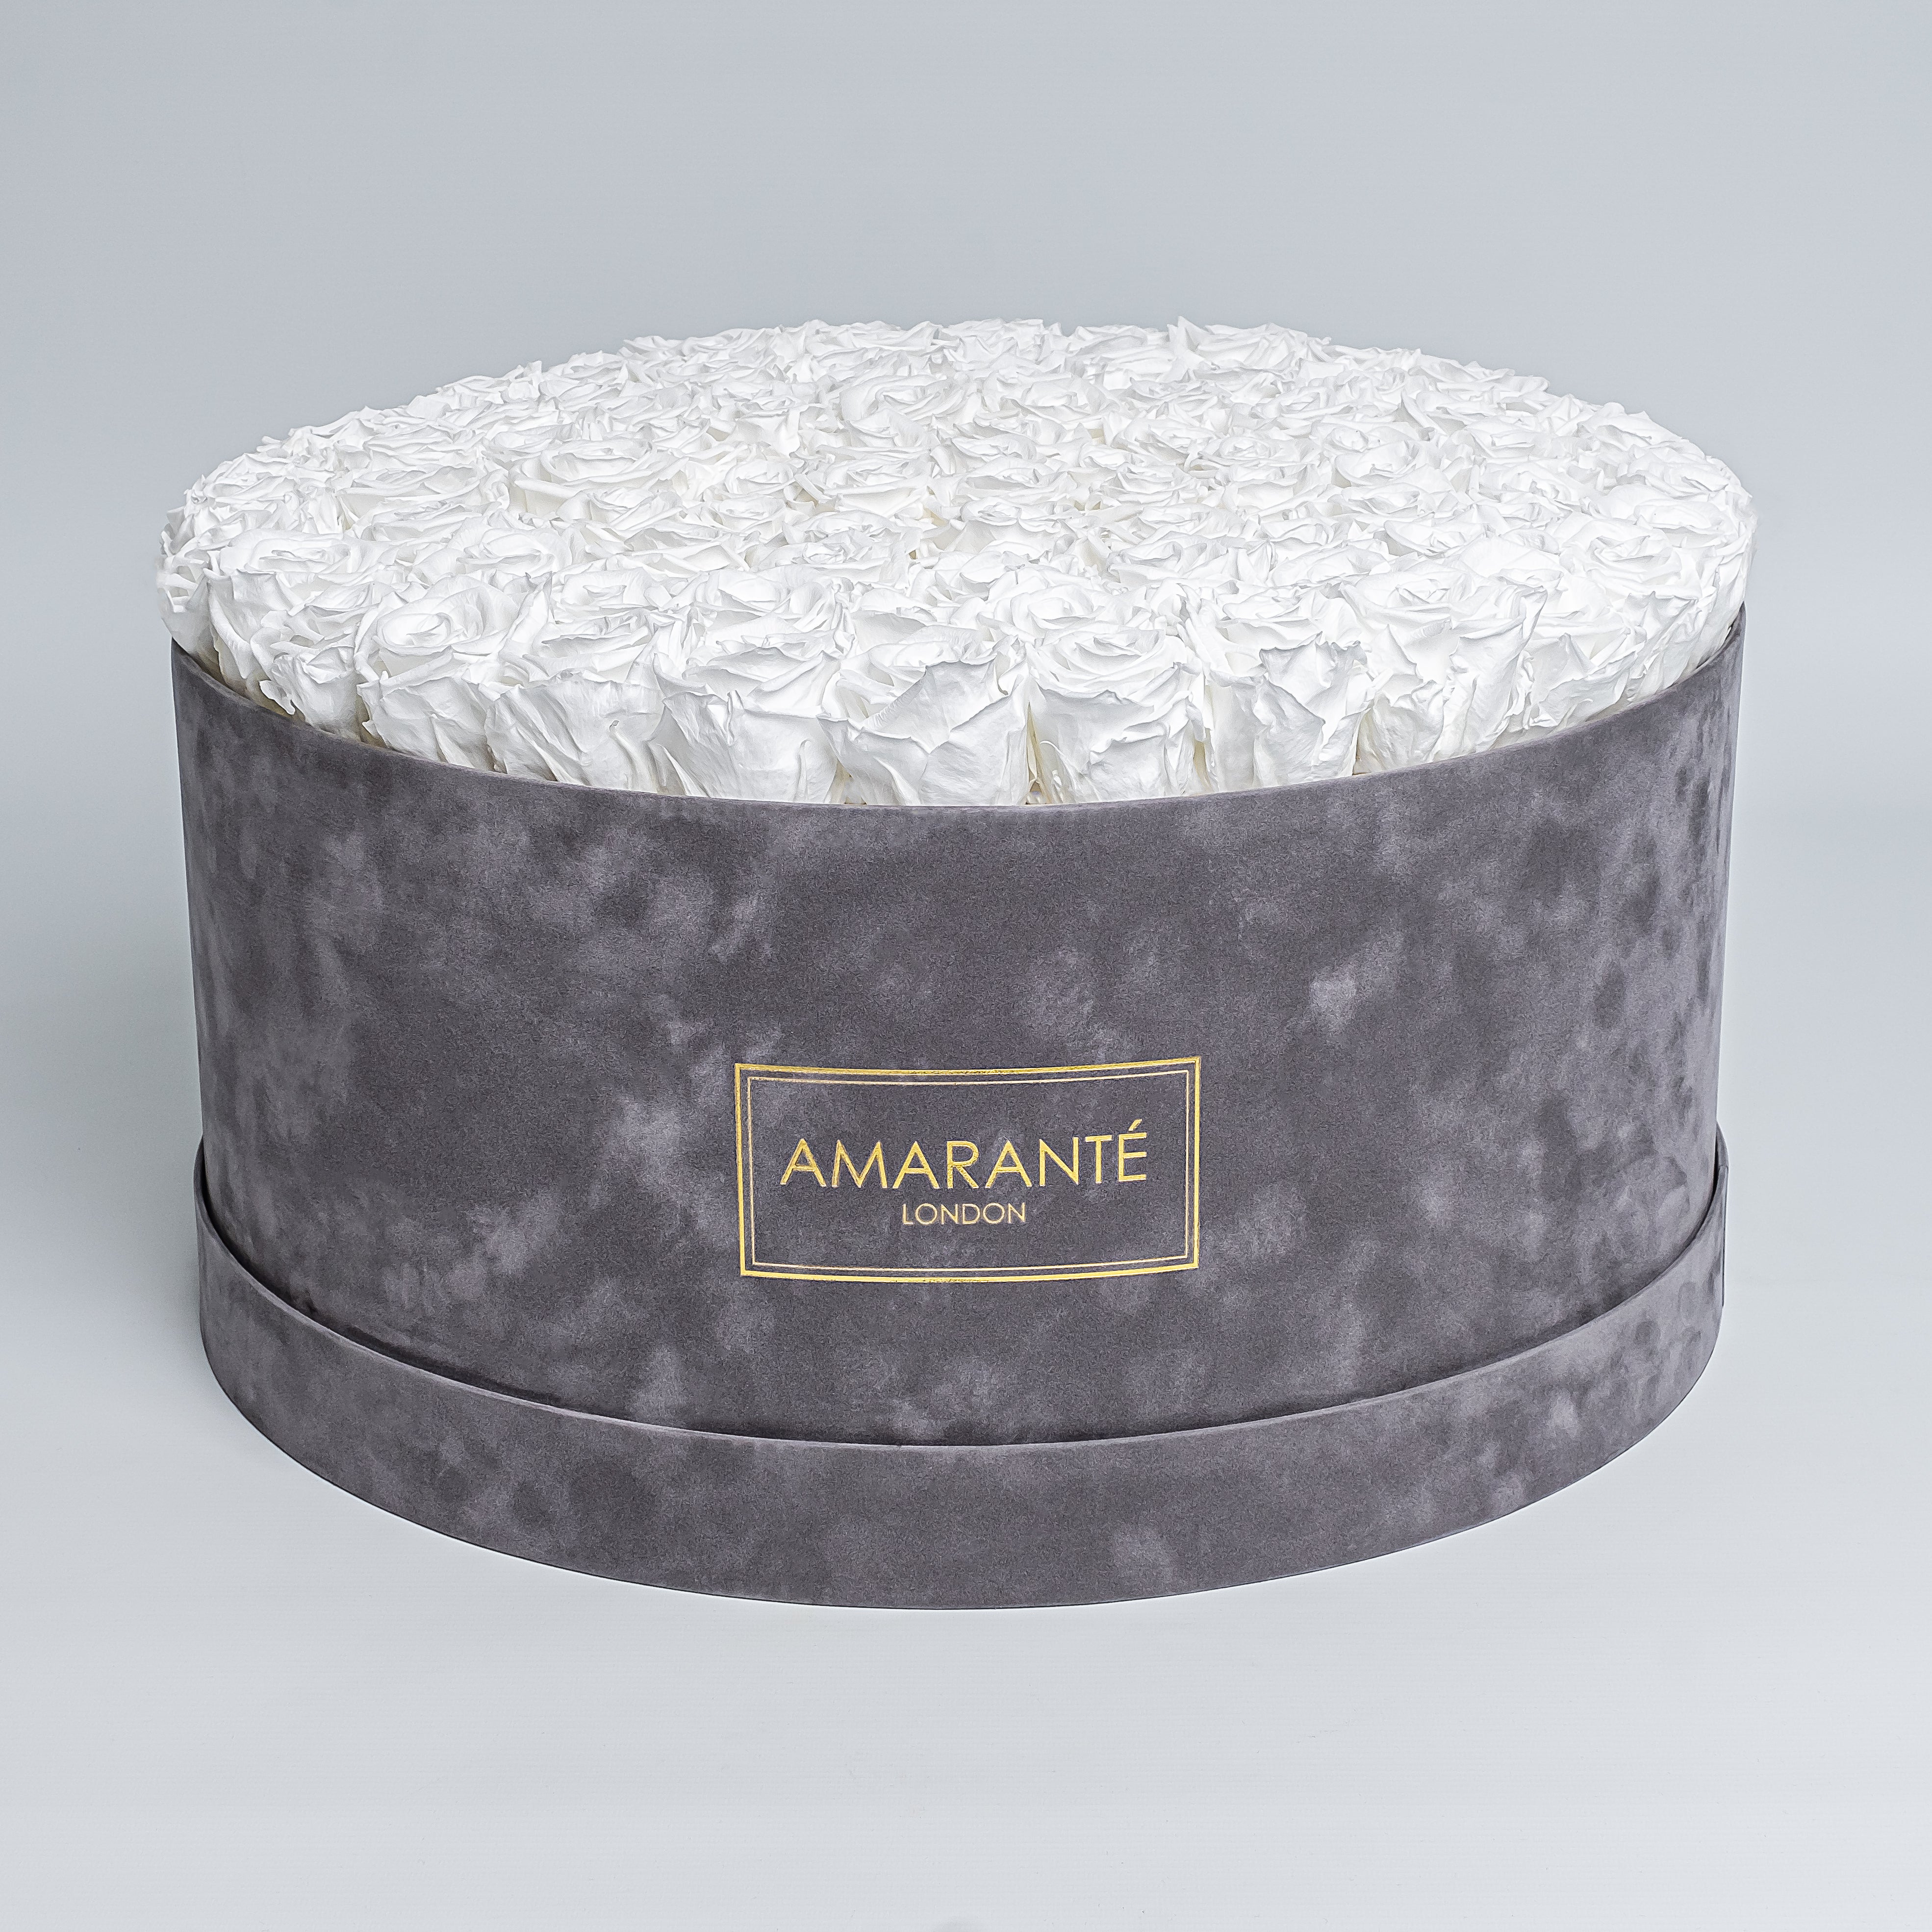 Elegant display of pure white forever roses in a chic grey hatbox with delicate suede finish, symbolising enduring elegance and sophistication. Perfect for gifting to loved ones on Birthdays, Anniversaries, Valentine's Day or other special events of everyday life. Free UK delivery.